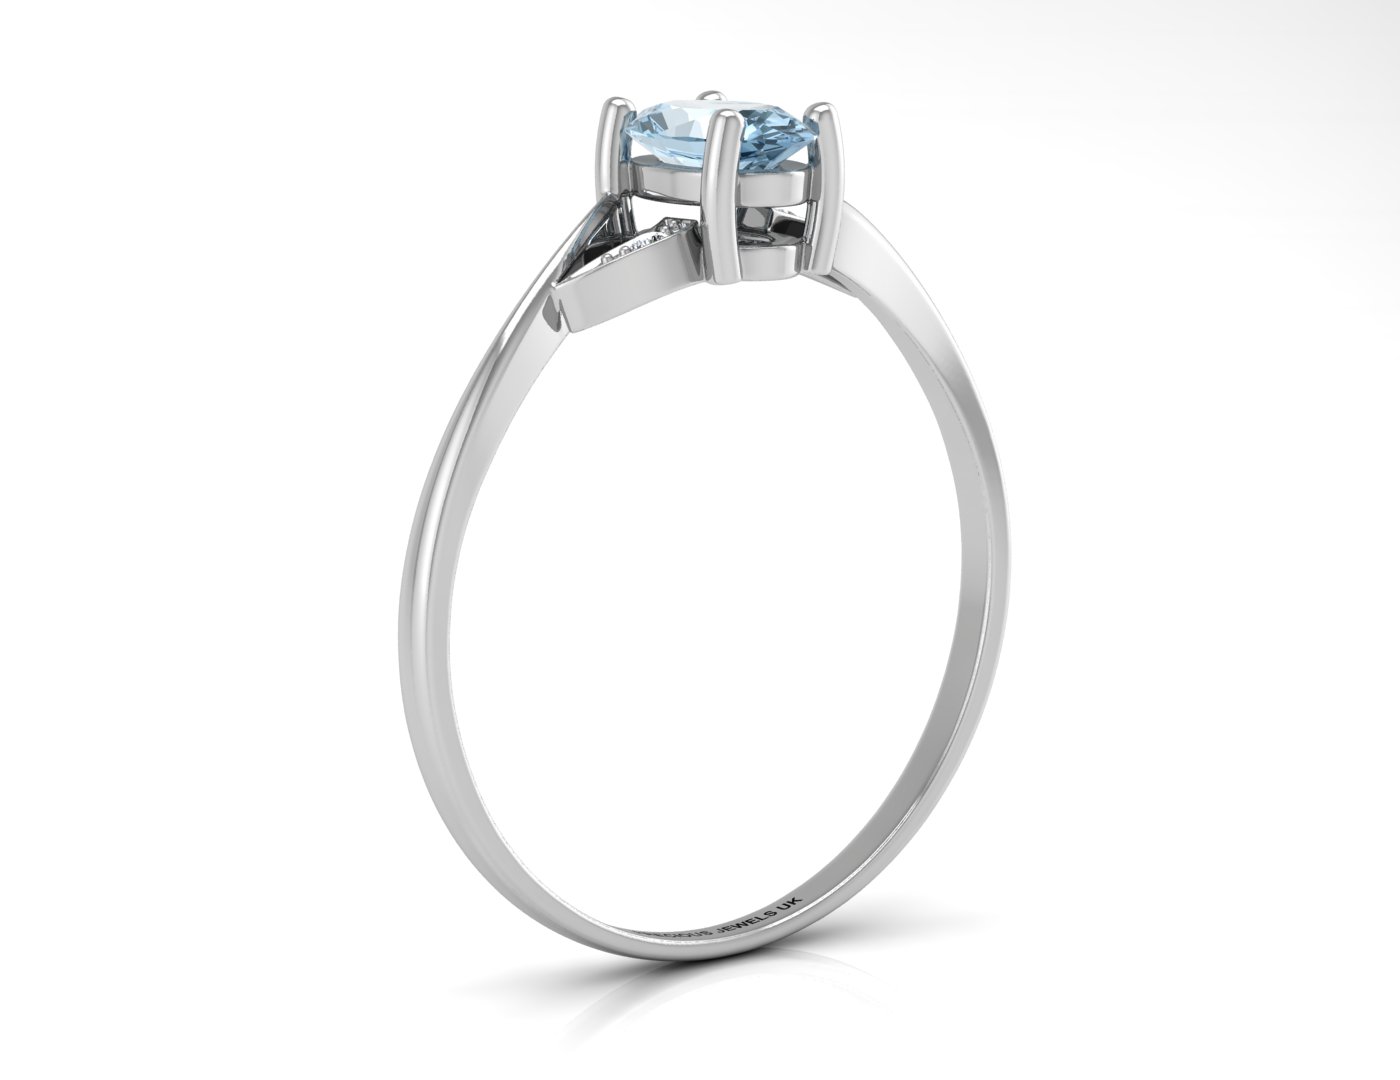 9ct White Gold Diamond And Blue Topaz Ring - Image 2 of 4